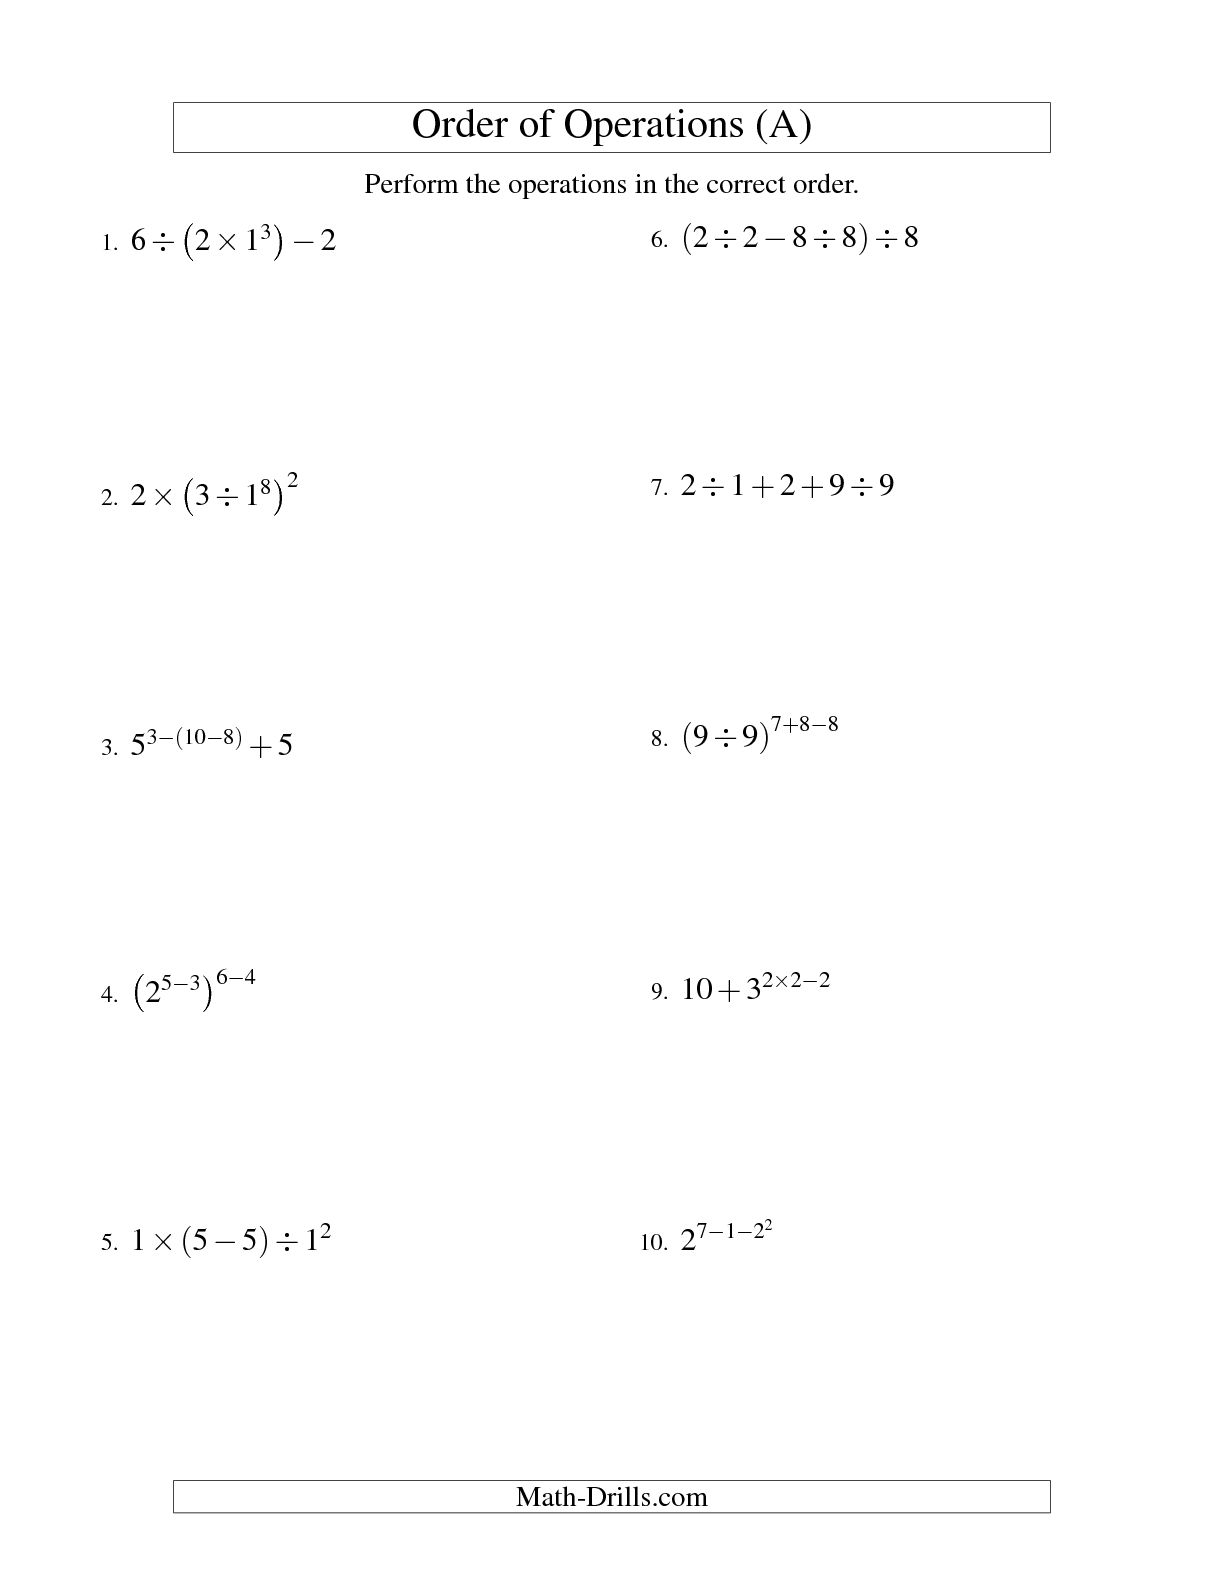 Order of Operations Worksheets with Answers Image